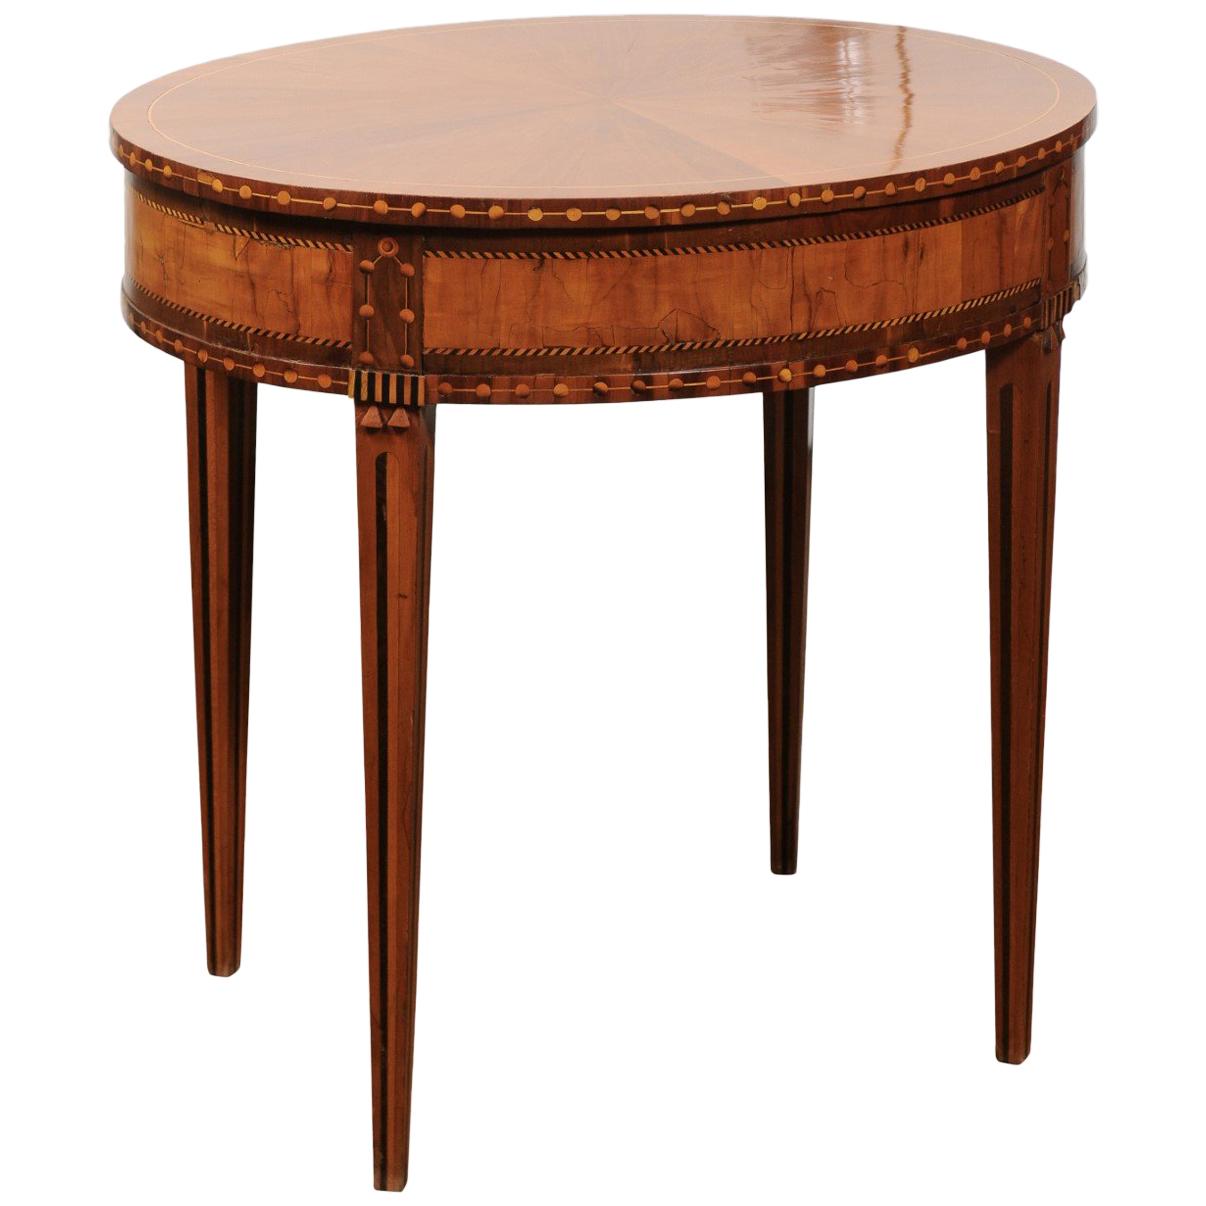 French 19th Century Oval Walnut and Satinwood Inlaid Table with Radiating Veneer